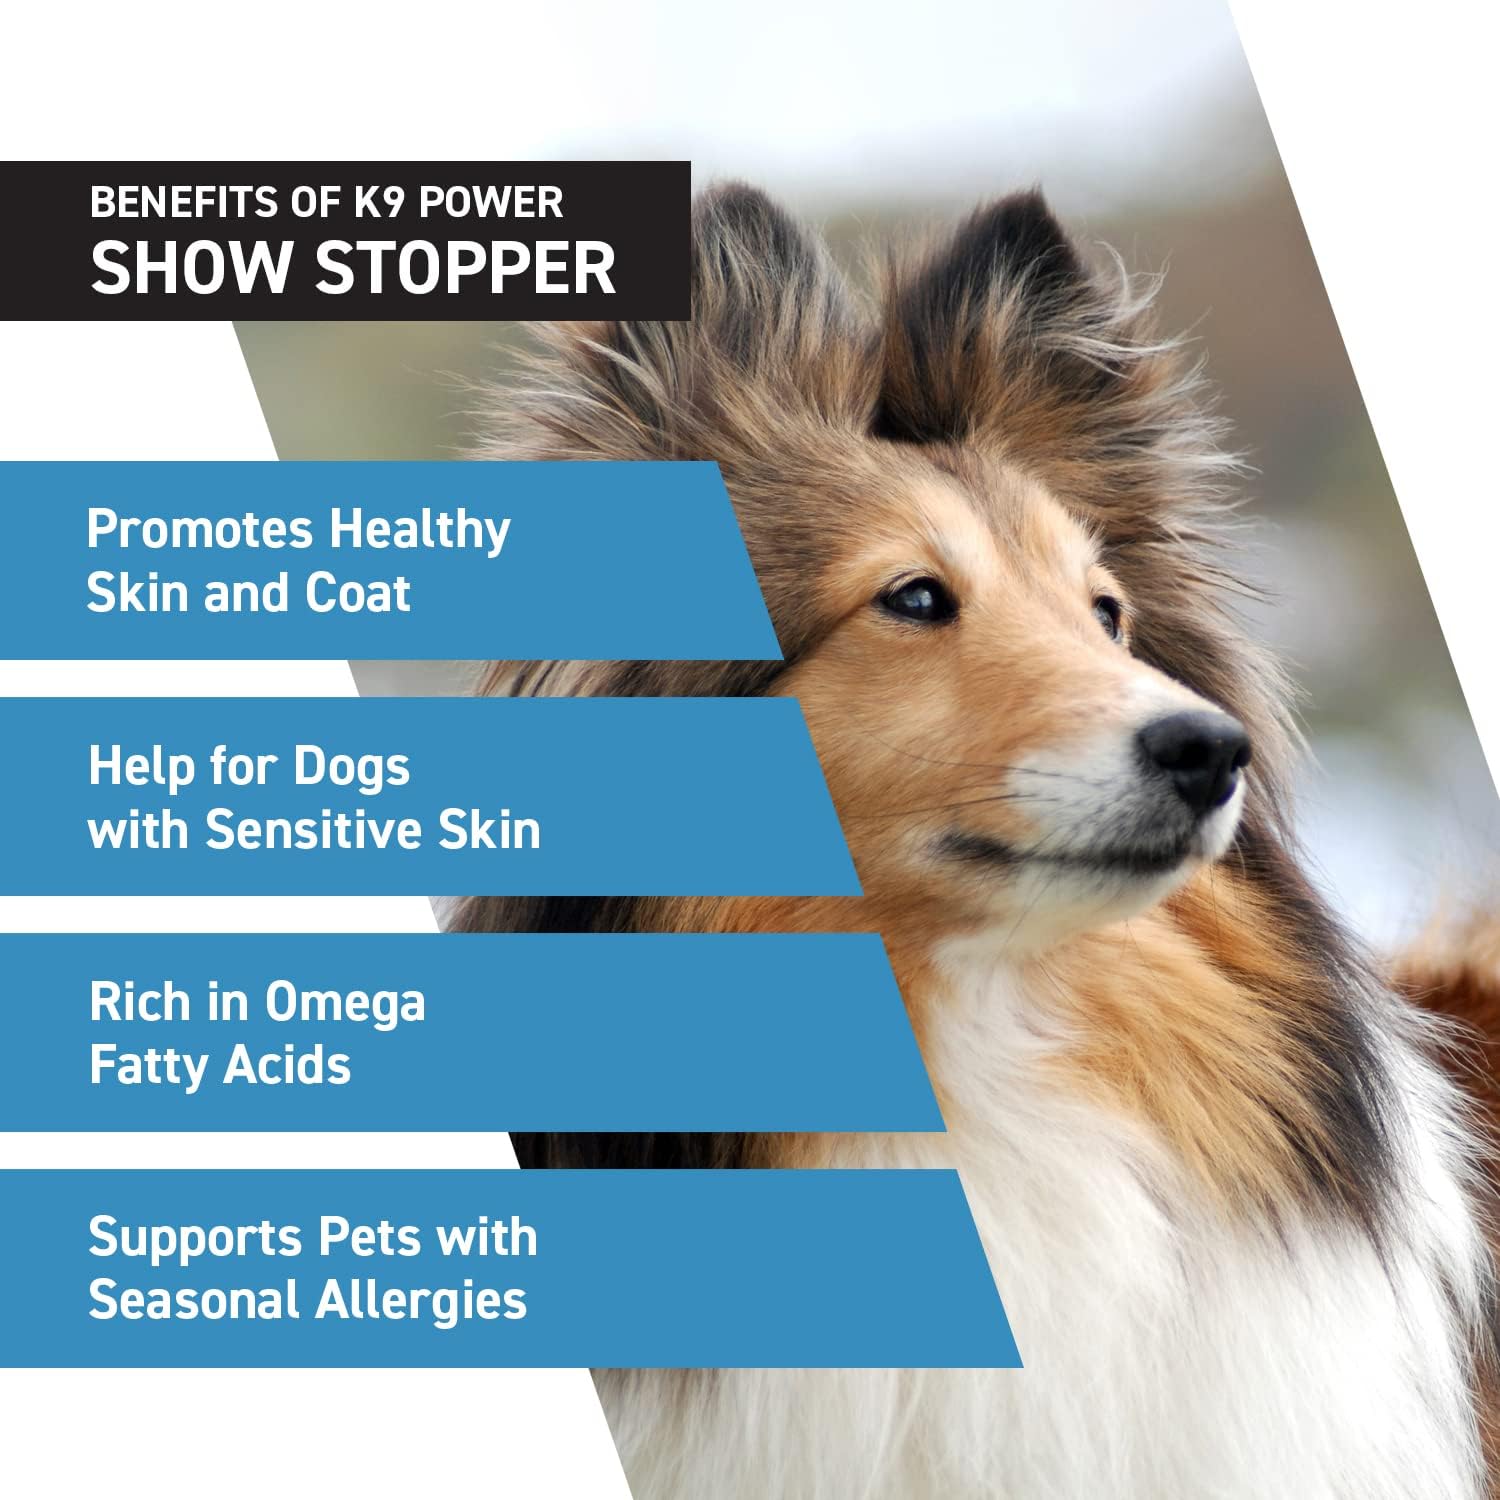 K9 Power Show Stopper - Premium Dog Skin Supplement, Dog Seasonal Allergy Relief, Dog Probiotics for Itchy Skin That Reduces Hot Spots and Excessive Shedding, 1lb : Pet Supplies